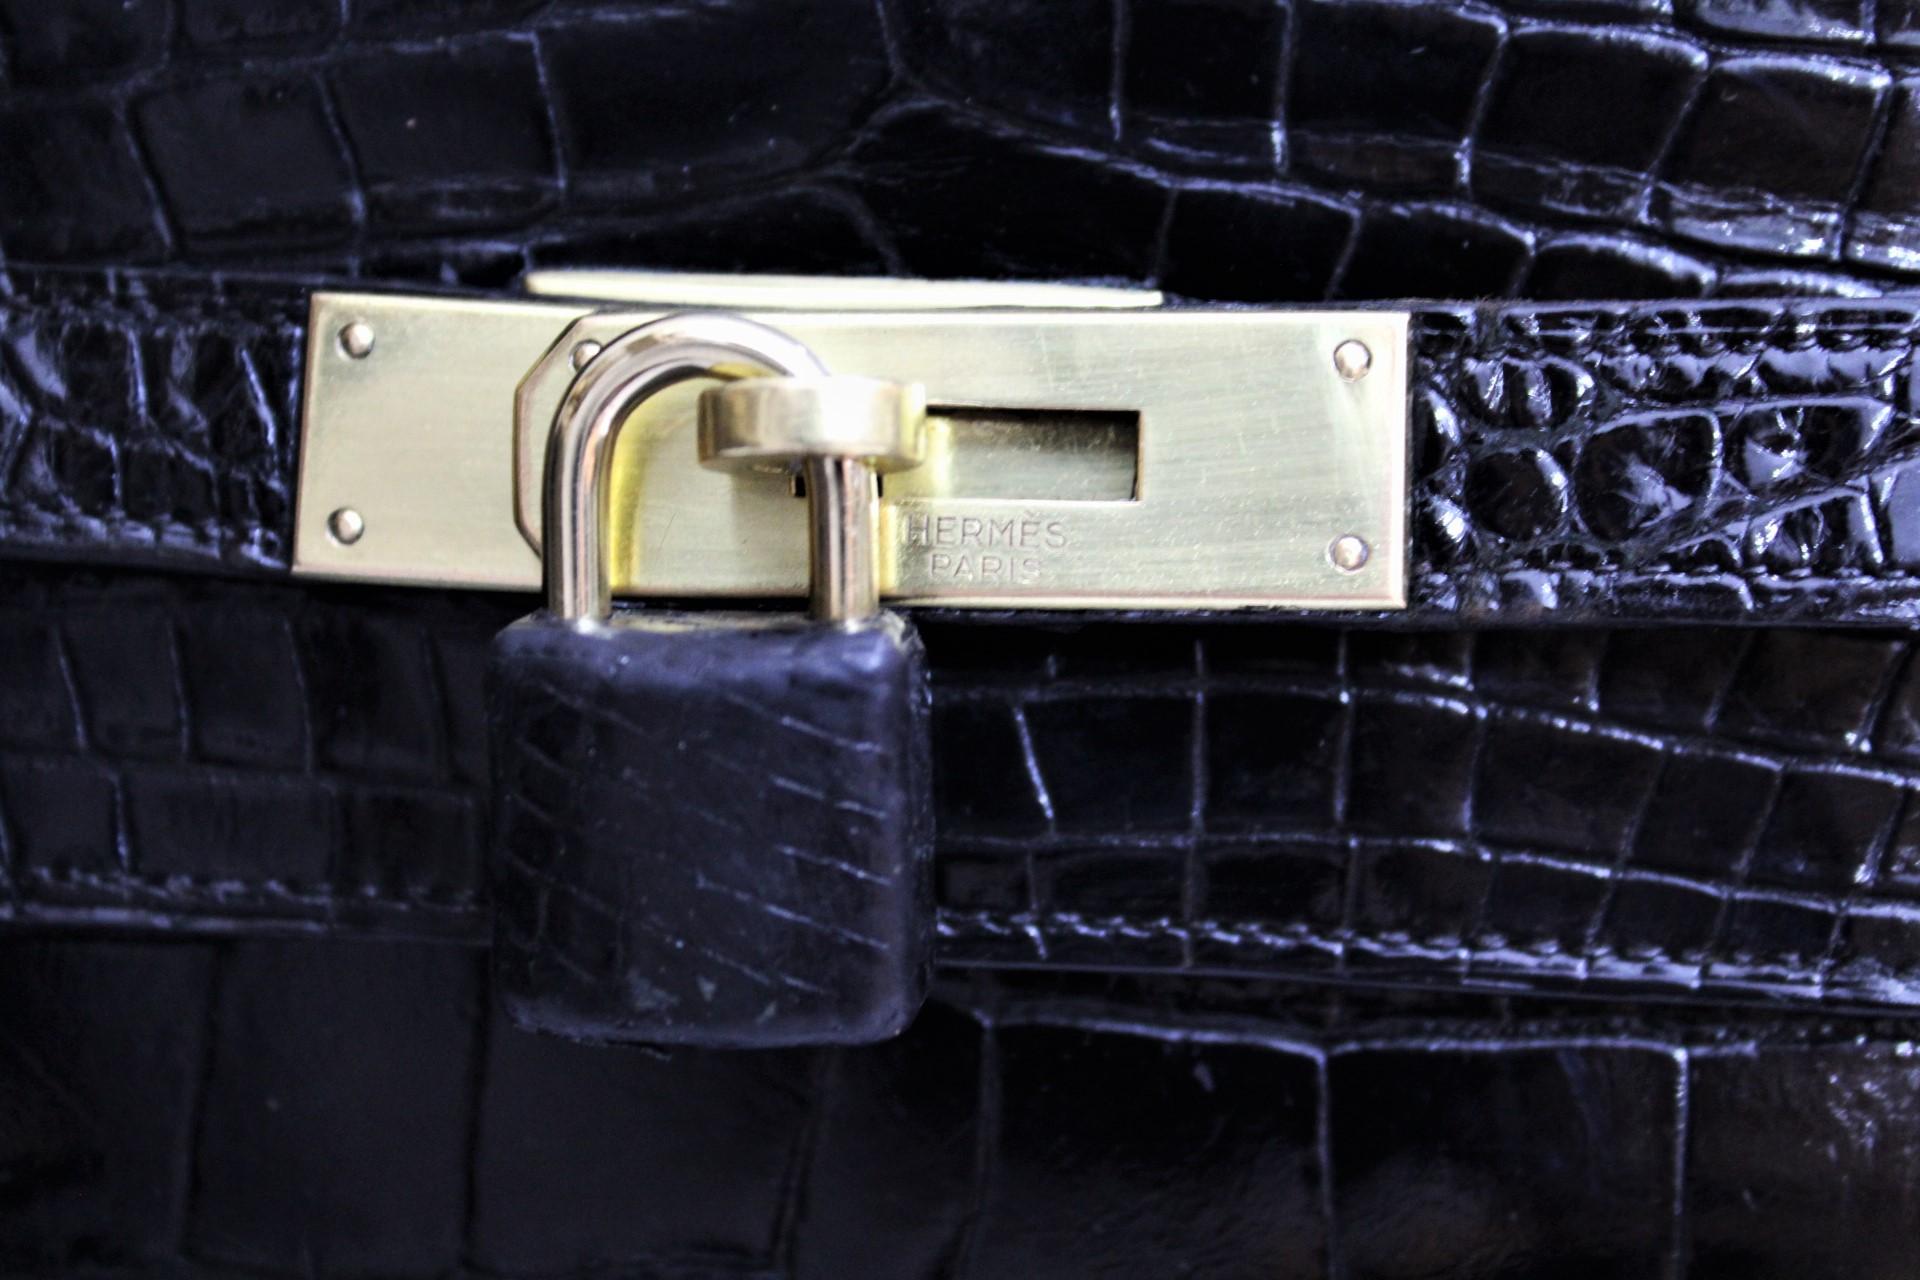 Beautiful Hermès Kelly Vintage bag featured in size 32. This bag is made from exotic crocodile skin, making it super valuable and coveted. The black color makes it extremely versatile and easy to coordinate with any outfit. The gold hardware